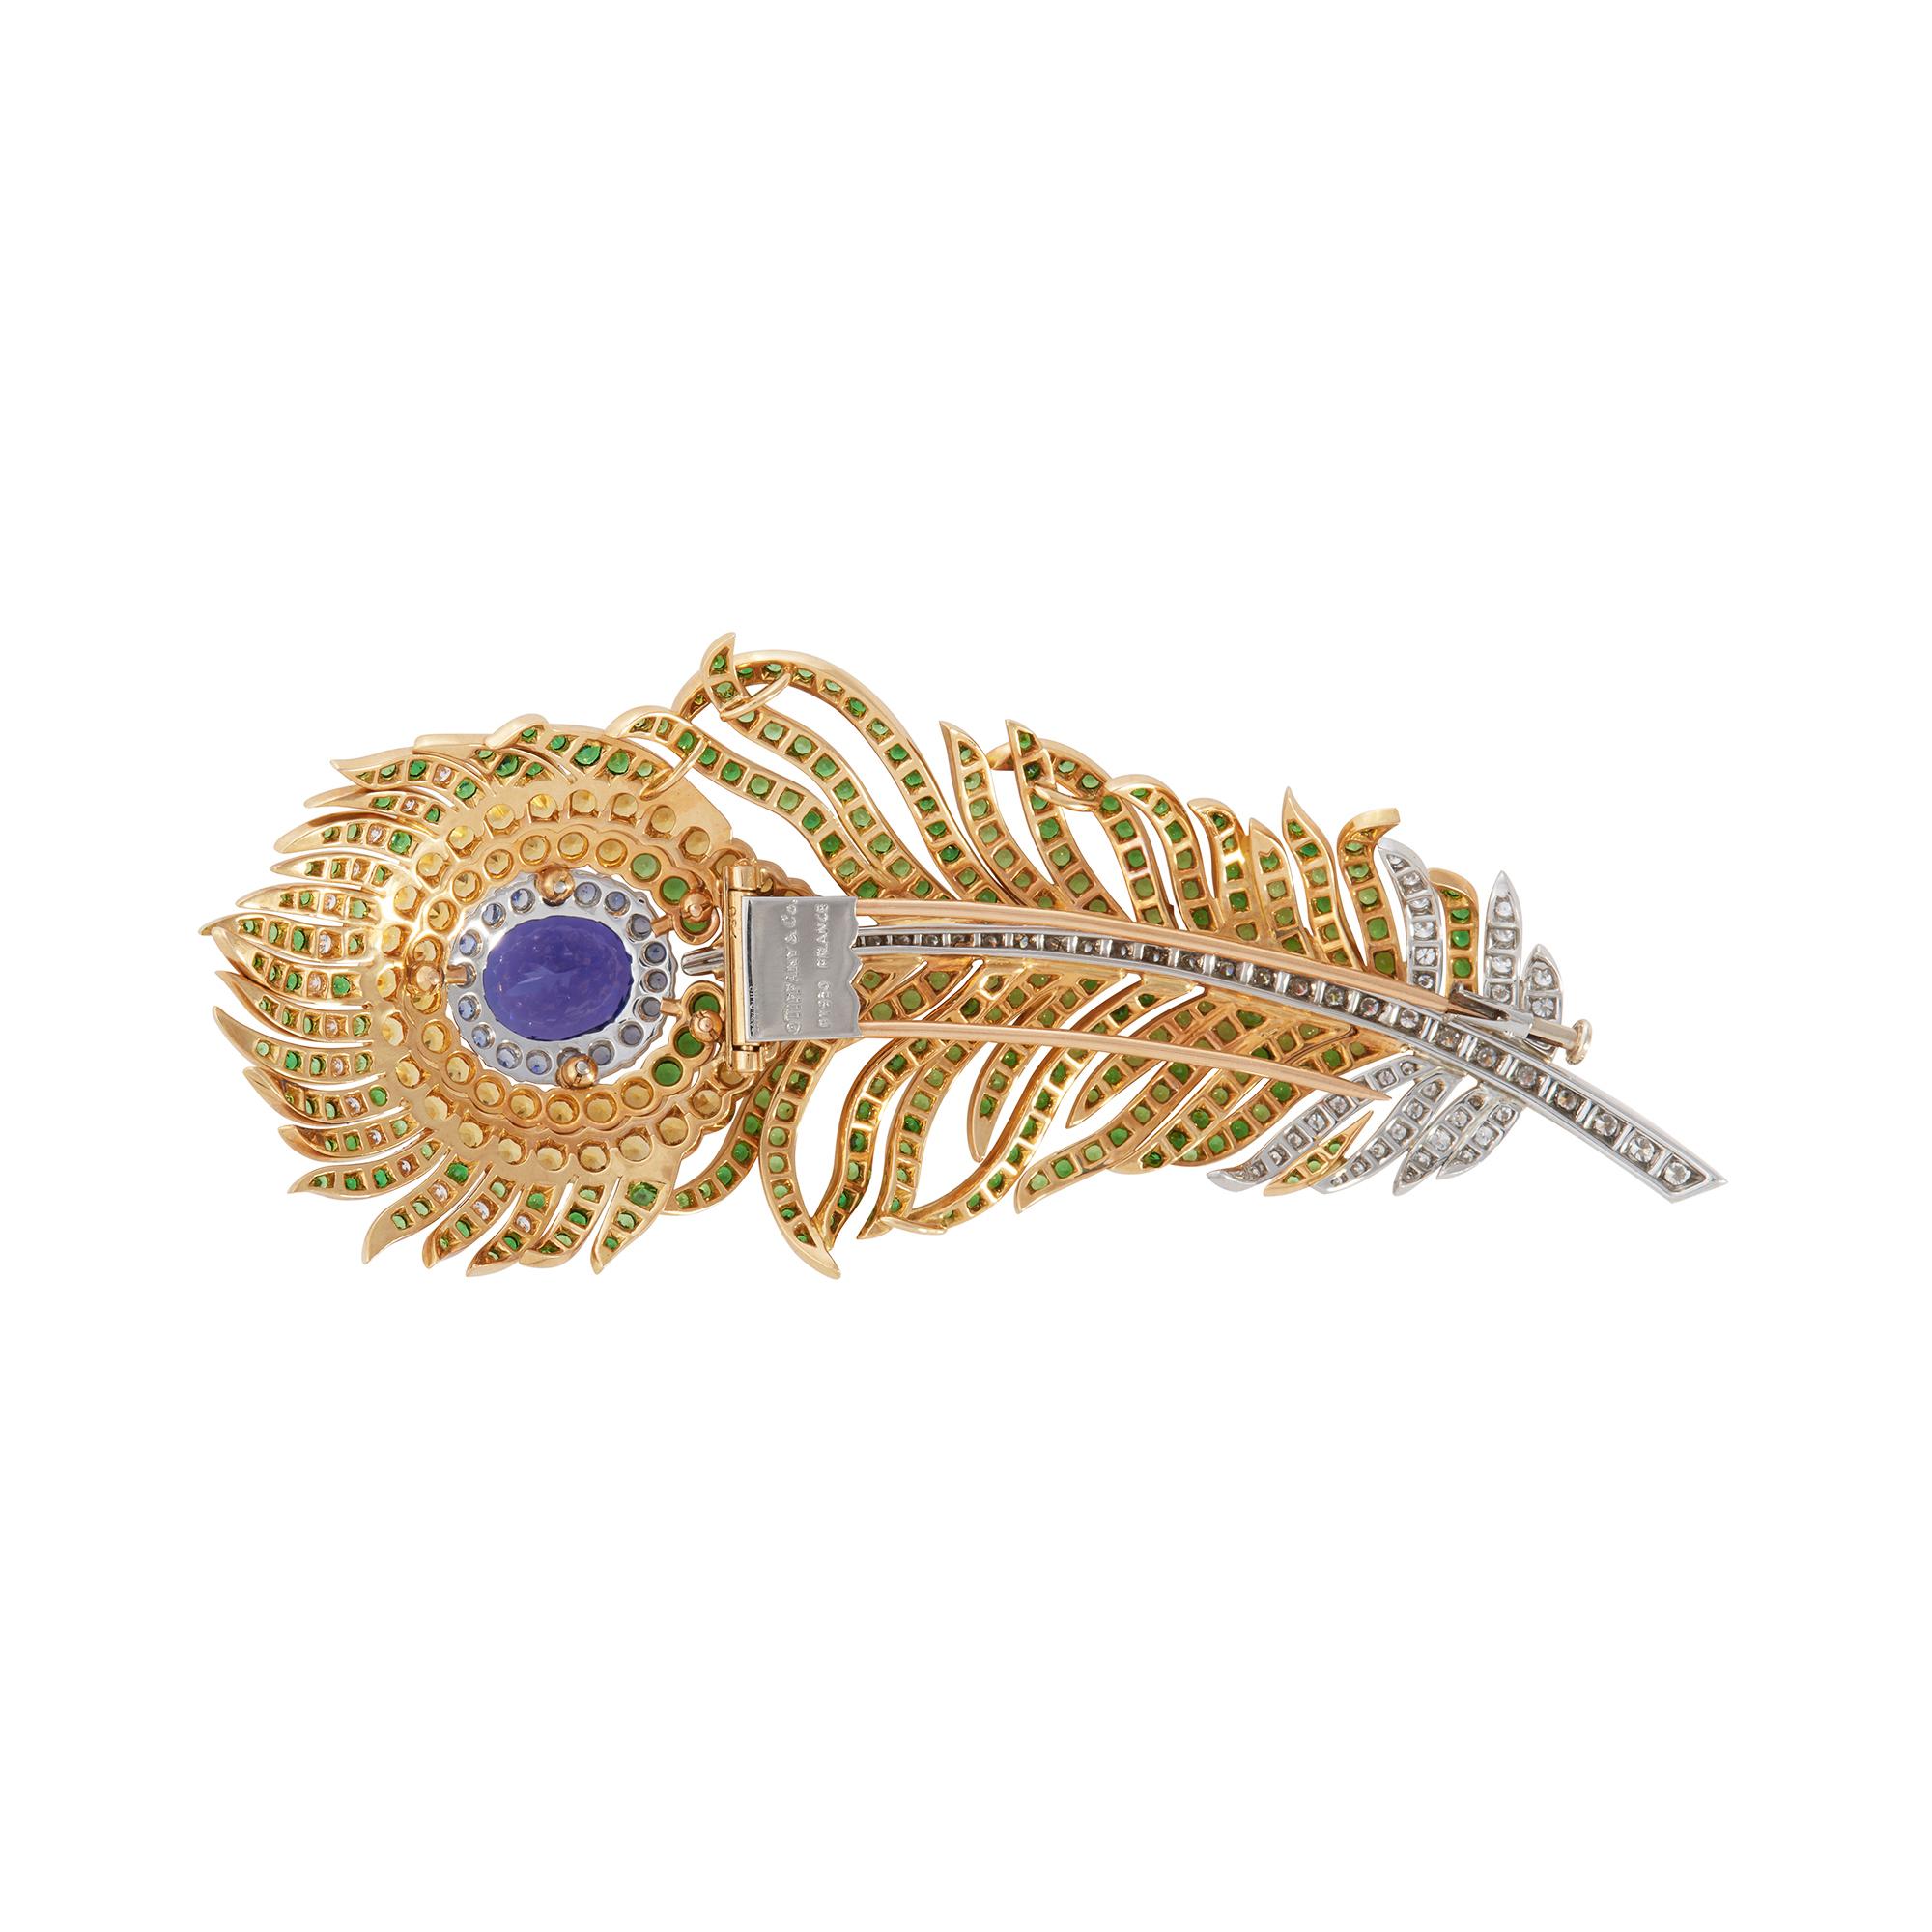 Authentic Tiffany & Co. brooch crafted in 18 karat yellow gold and platinum to resemble a peacock feather. The brooch centers on an oval cut tanzanite and it is set throughout with yellow and blue sapphires, tsavorite garnets, and is accented by 82